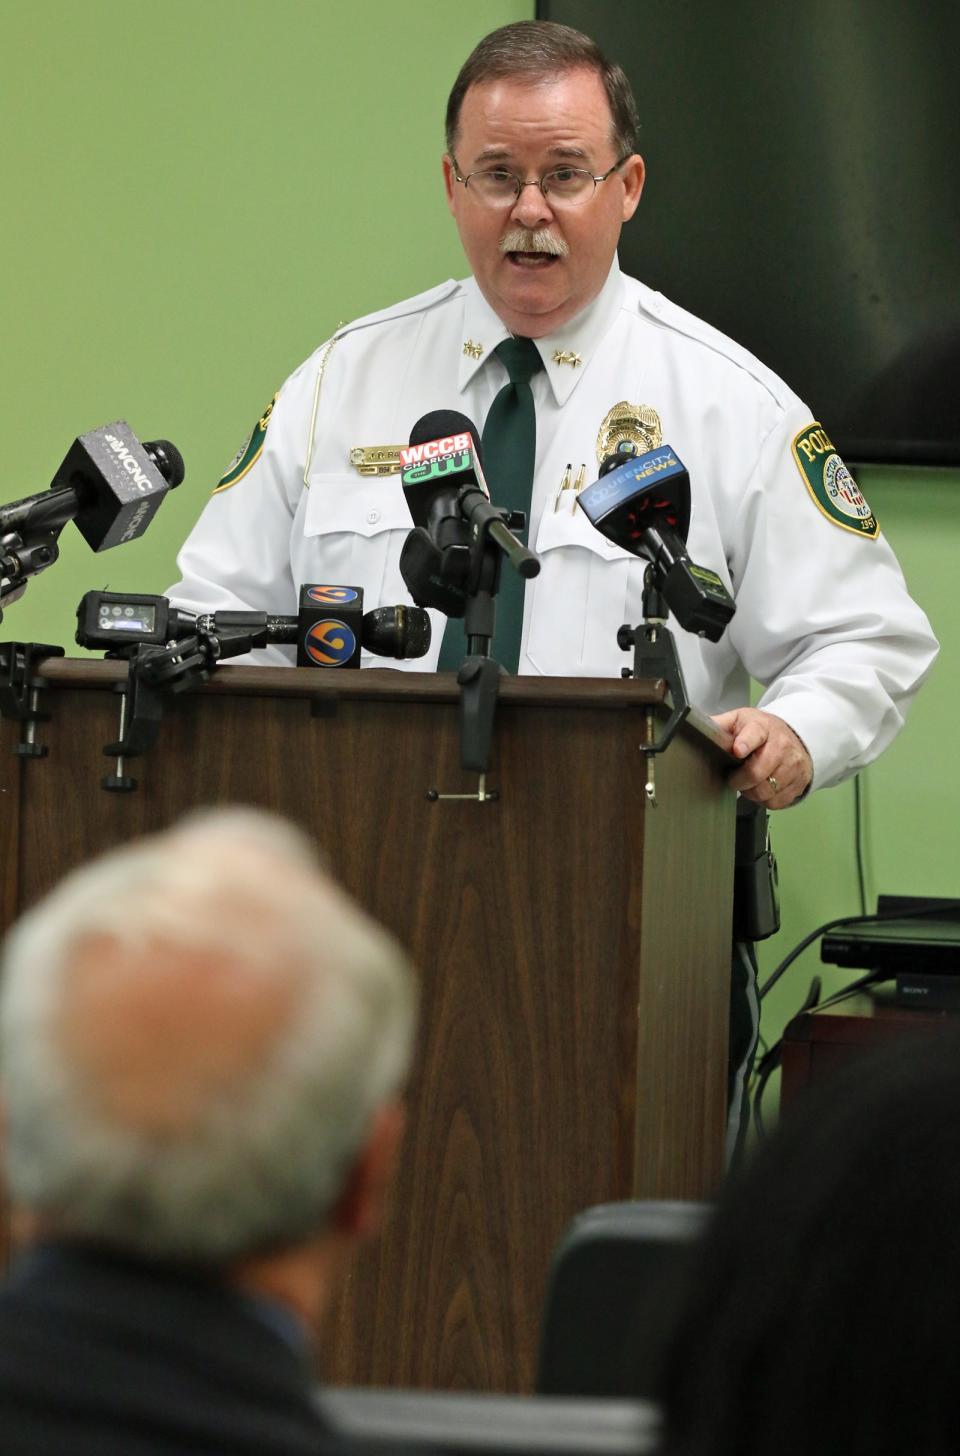 Gaston County Police Chief Joseph Ramey speaks during a press conference about local efforts to fight the opioid epidemic held Tuesday morning at the Phoenix Counseling Center on Court Drive.